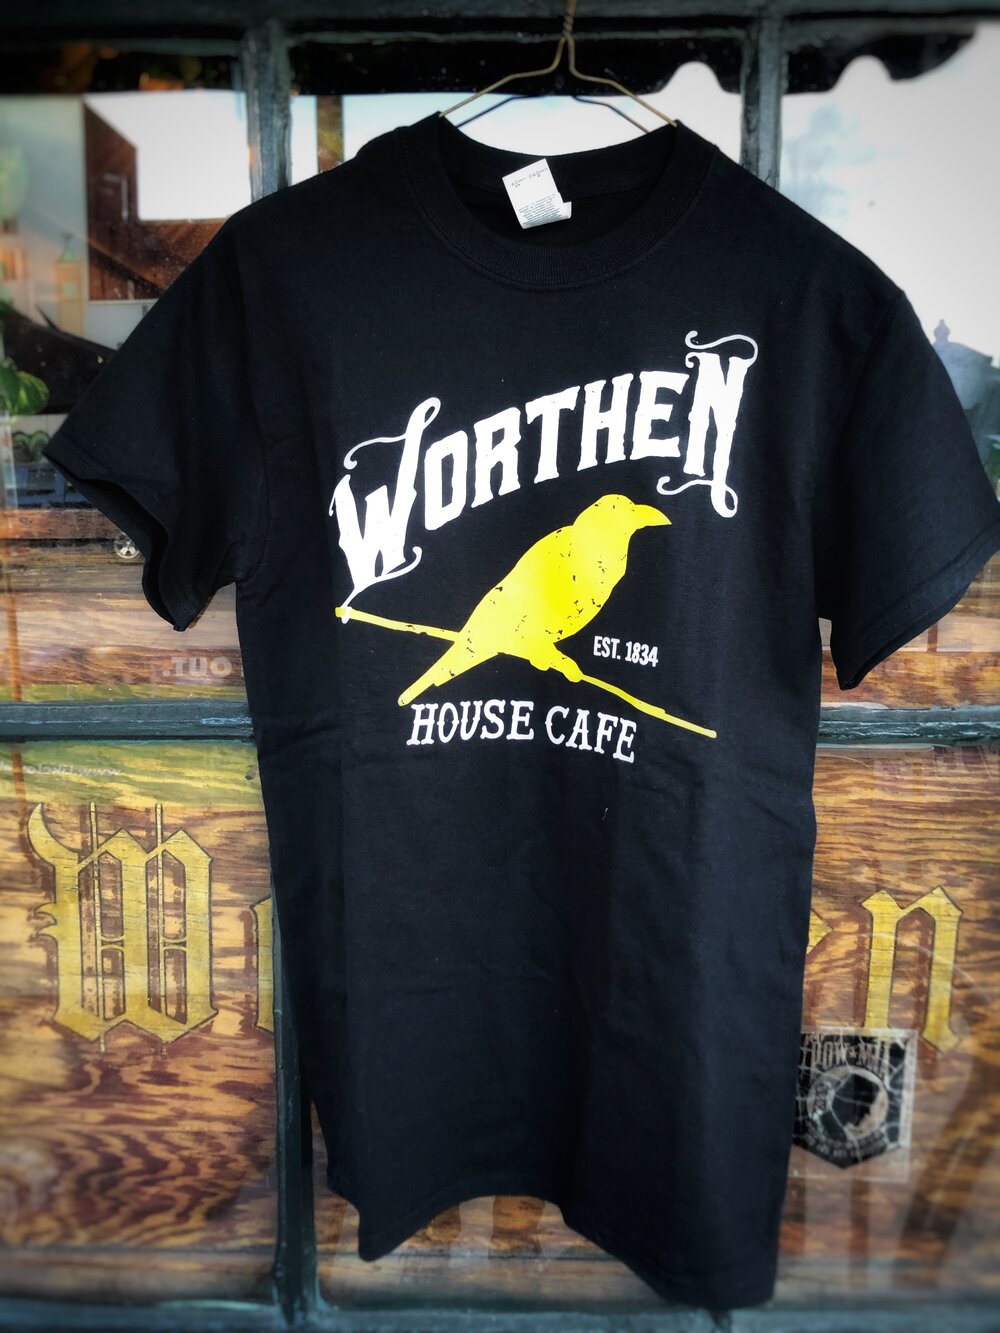 Black Front Logo Tee S/S or L/S — Worthen House Cafe